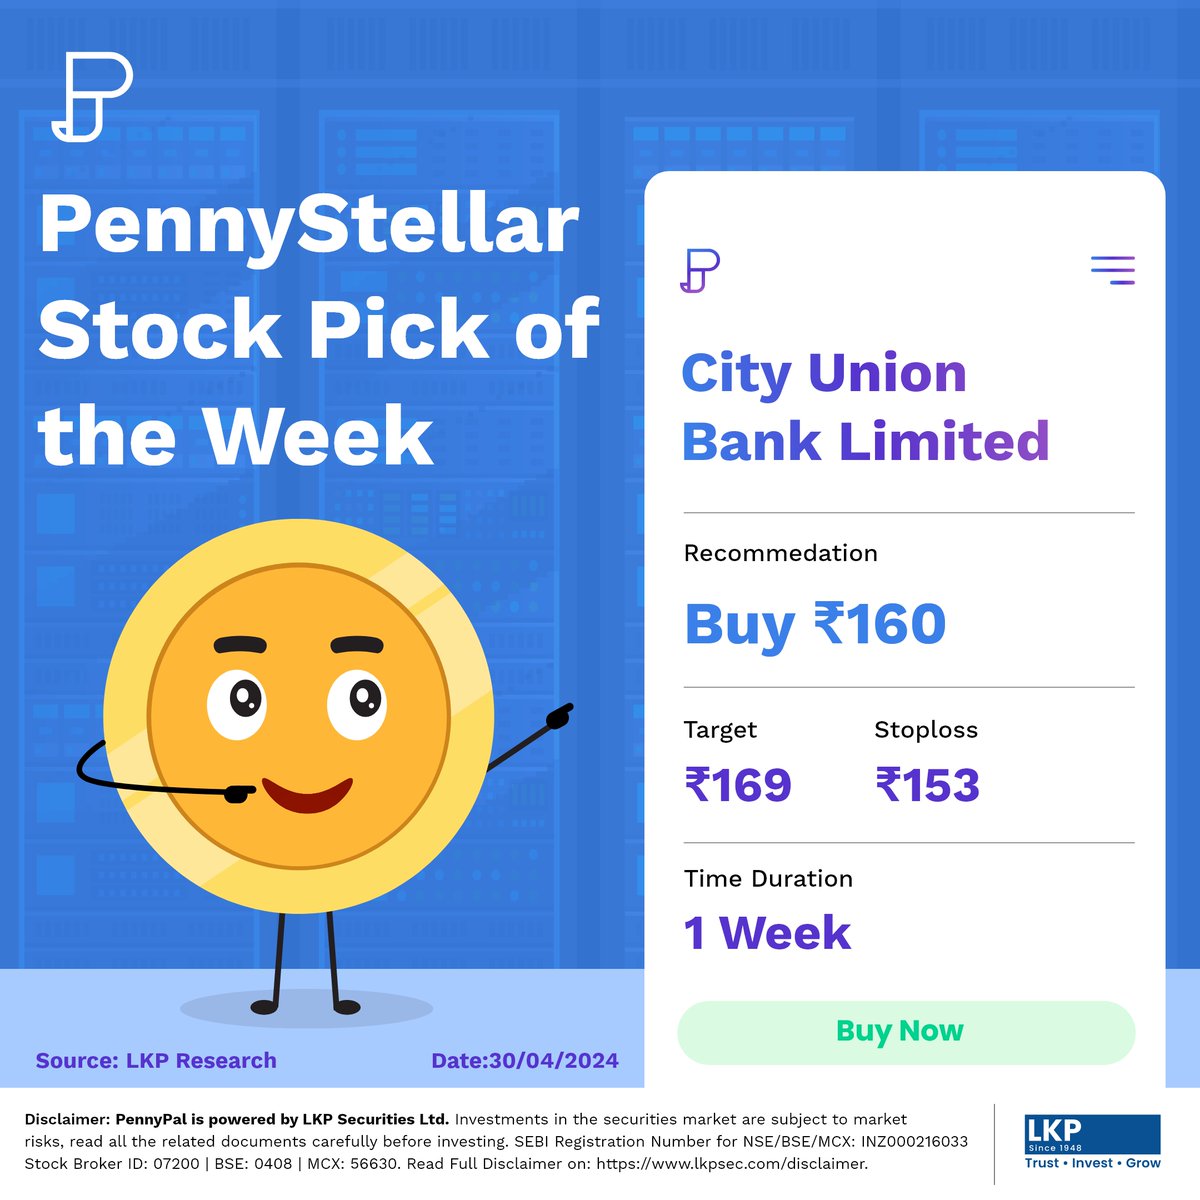 Hey everyone, PennyStellar just dropped a solid stock pick after some thorough research. Time to update those portfolios!

#pennypal #cityunionbank #investingtips #stocktips #stockmarketindia #stockinfocus #stocktowatch #ShareMarketNewsToday #stockmarketnews #stockmarketinvesting